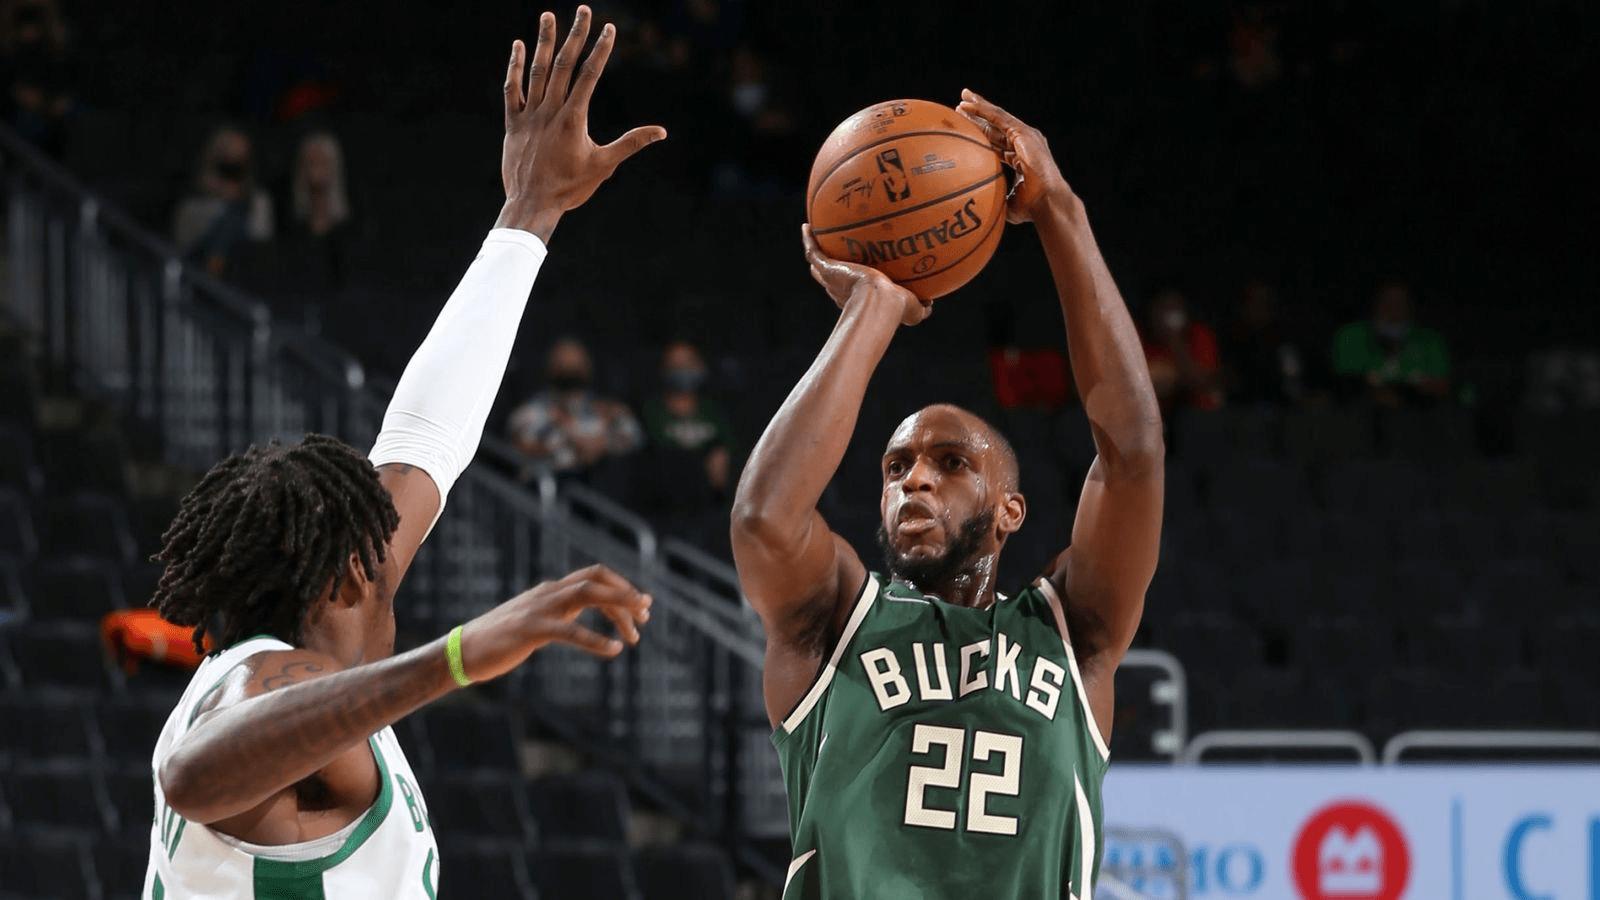 Bucks’ Solid Home Back-to-Back Record Helps Tip Scales Over Visiting Knicks